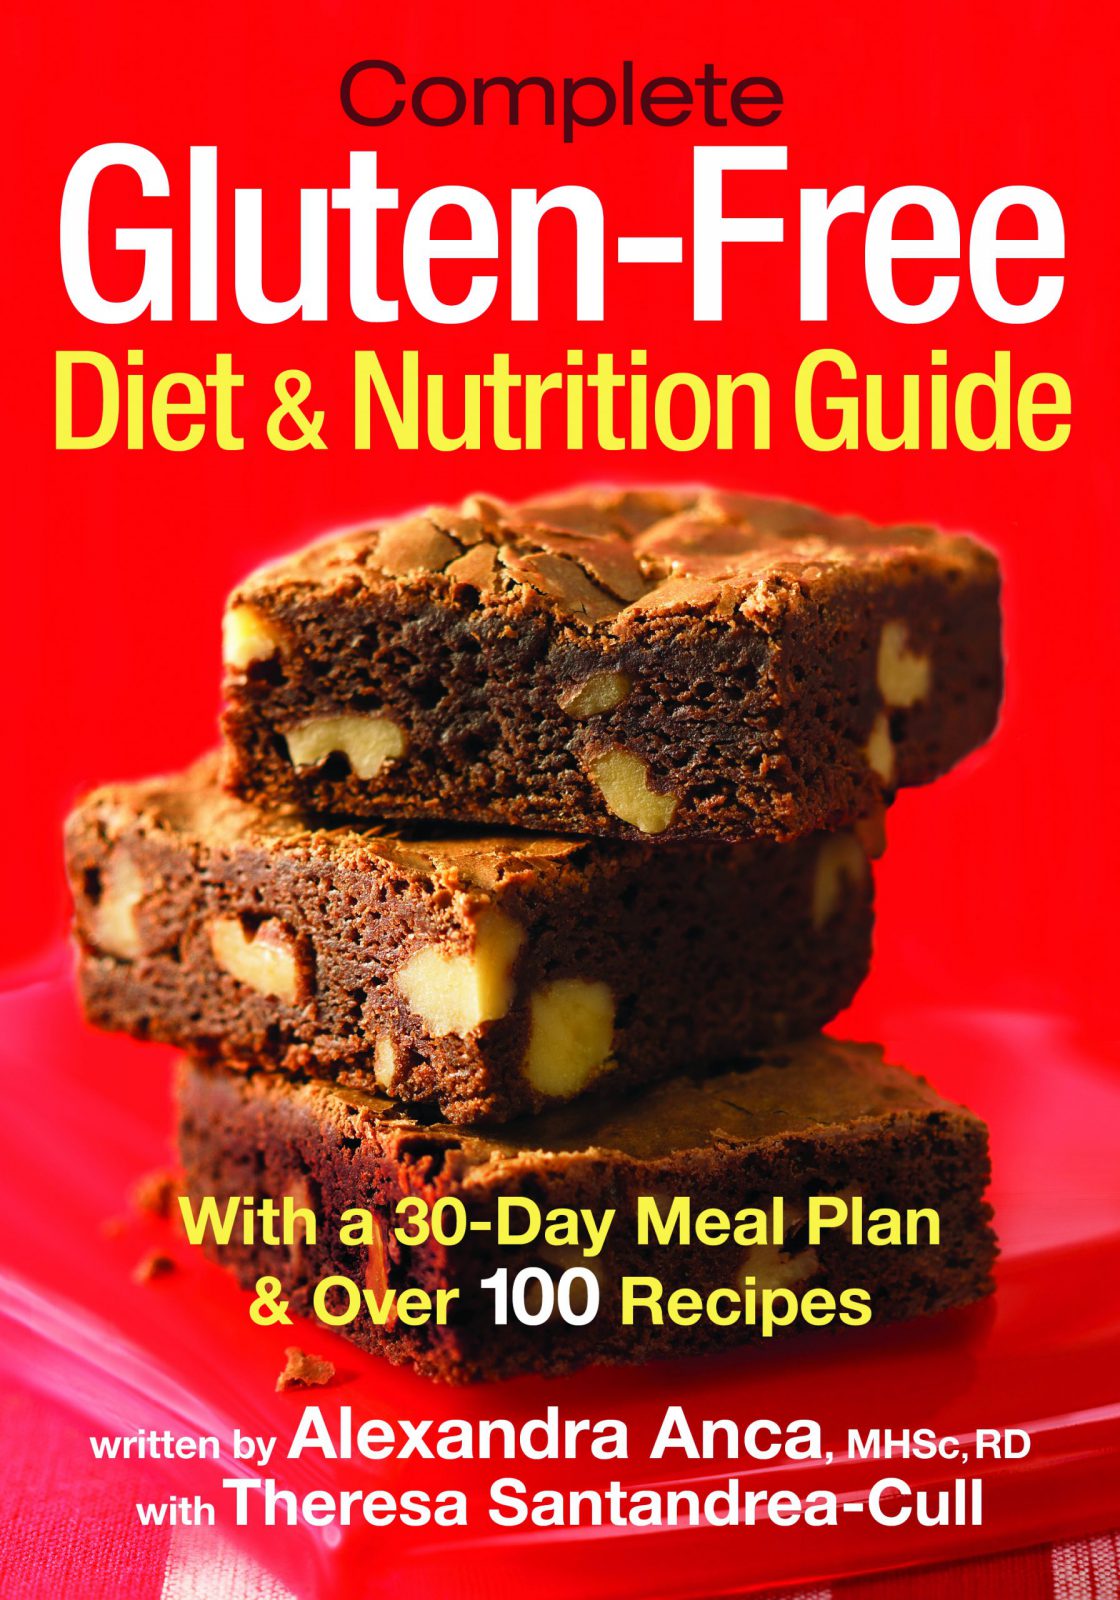 Complete Gluten-Free Diet and Nutrition Guide